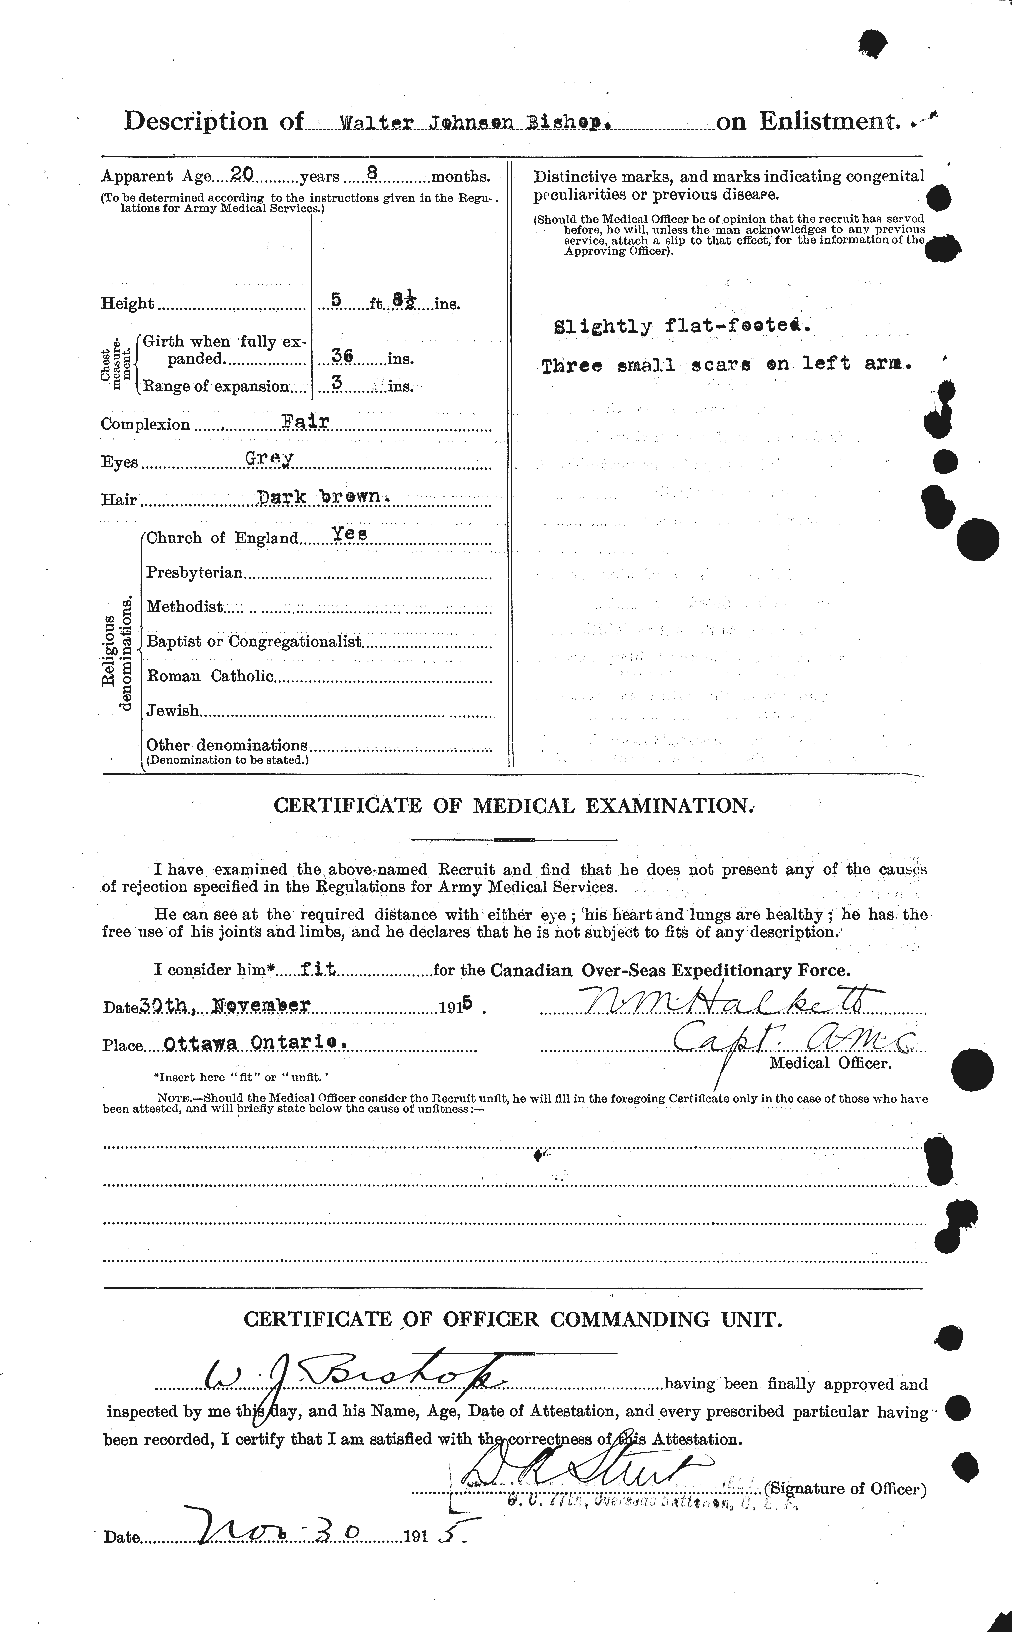 Personnel Records of the First World War - CEF 245622b